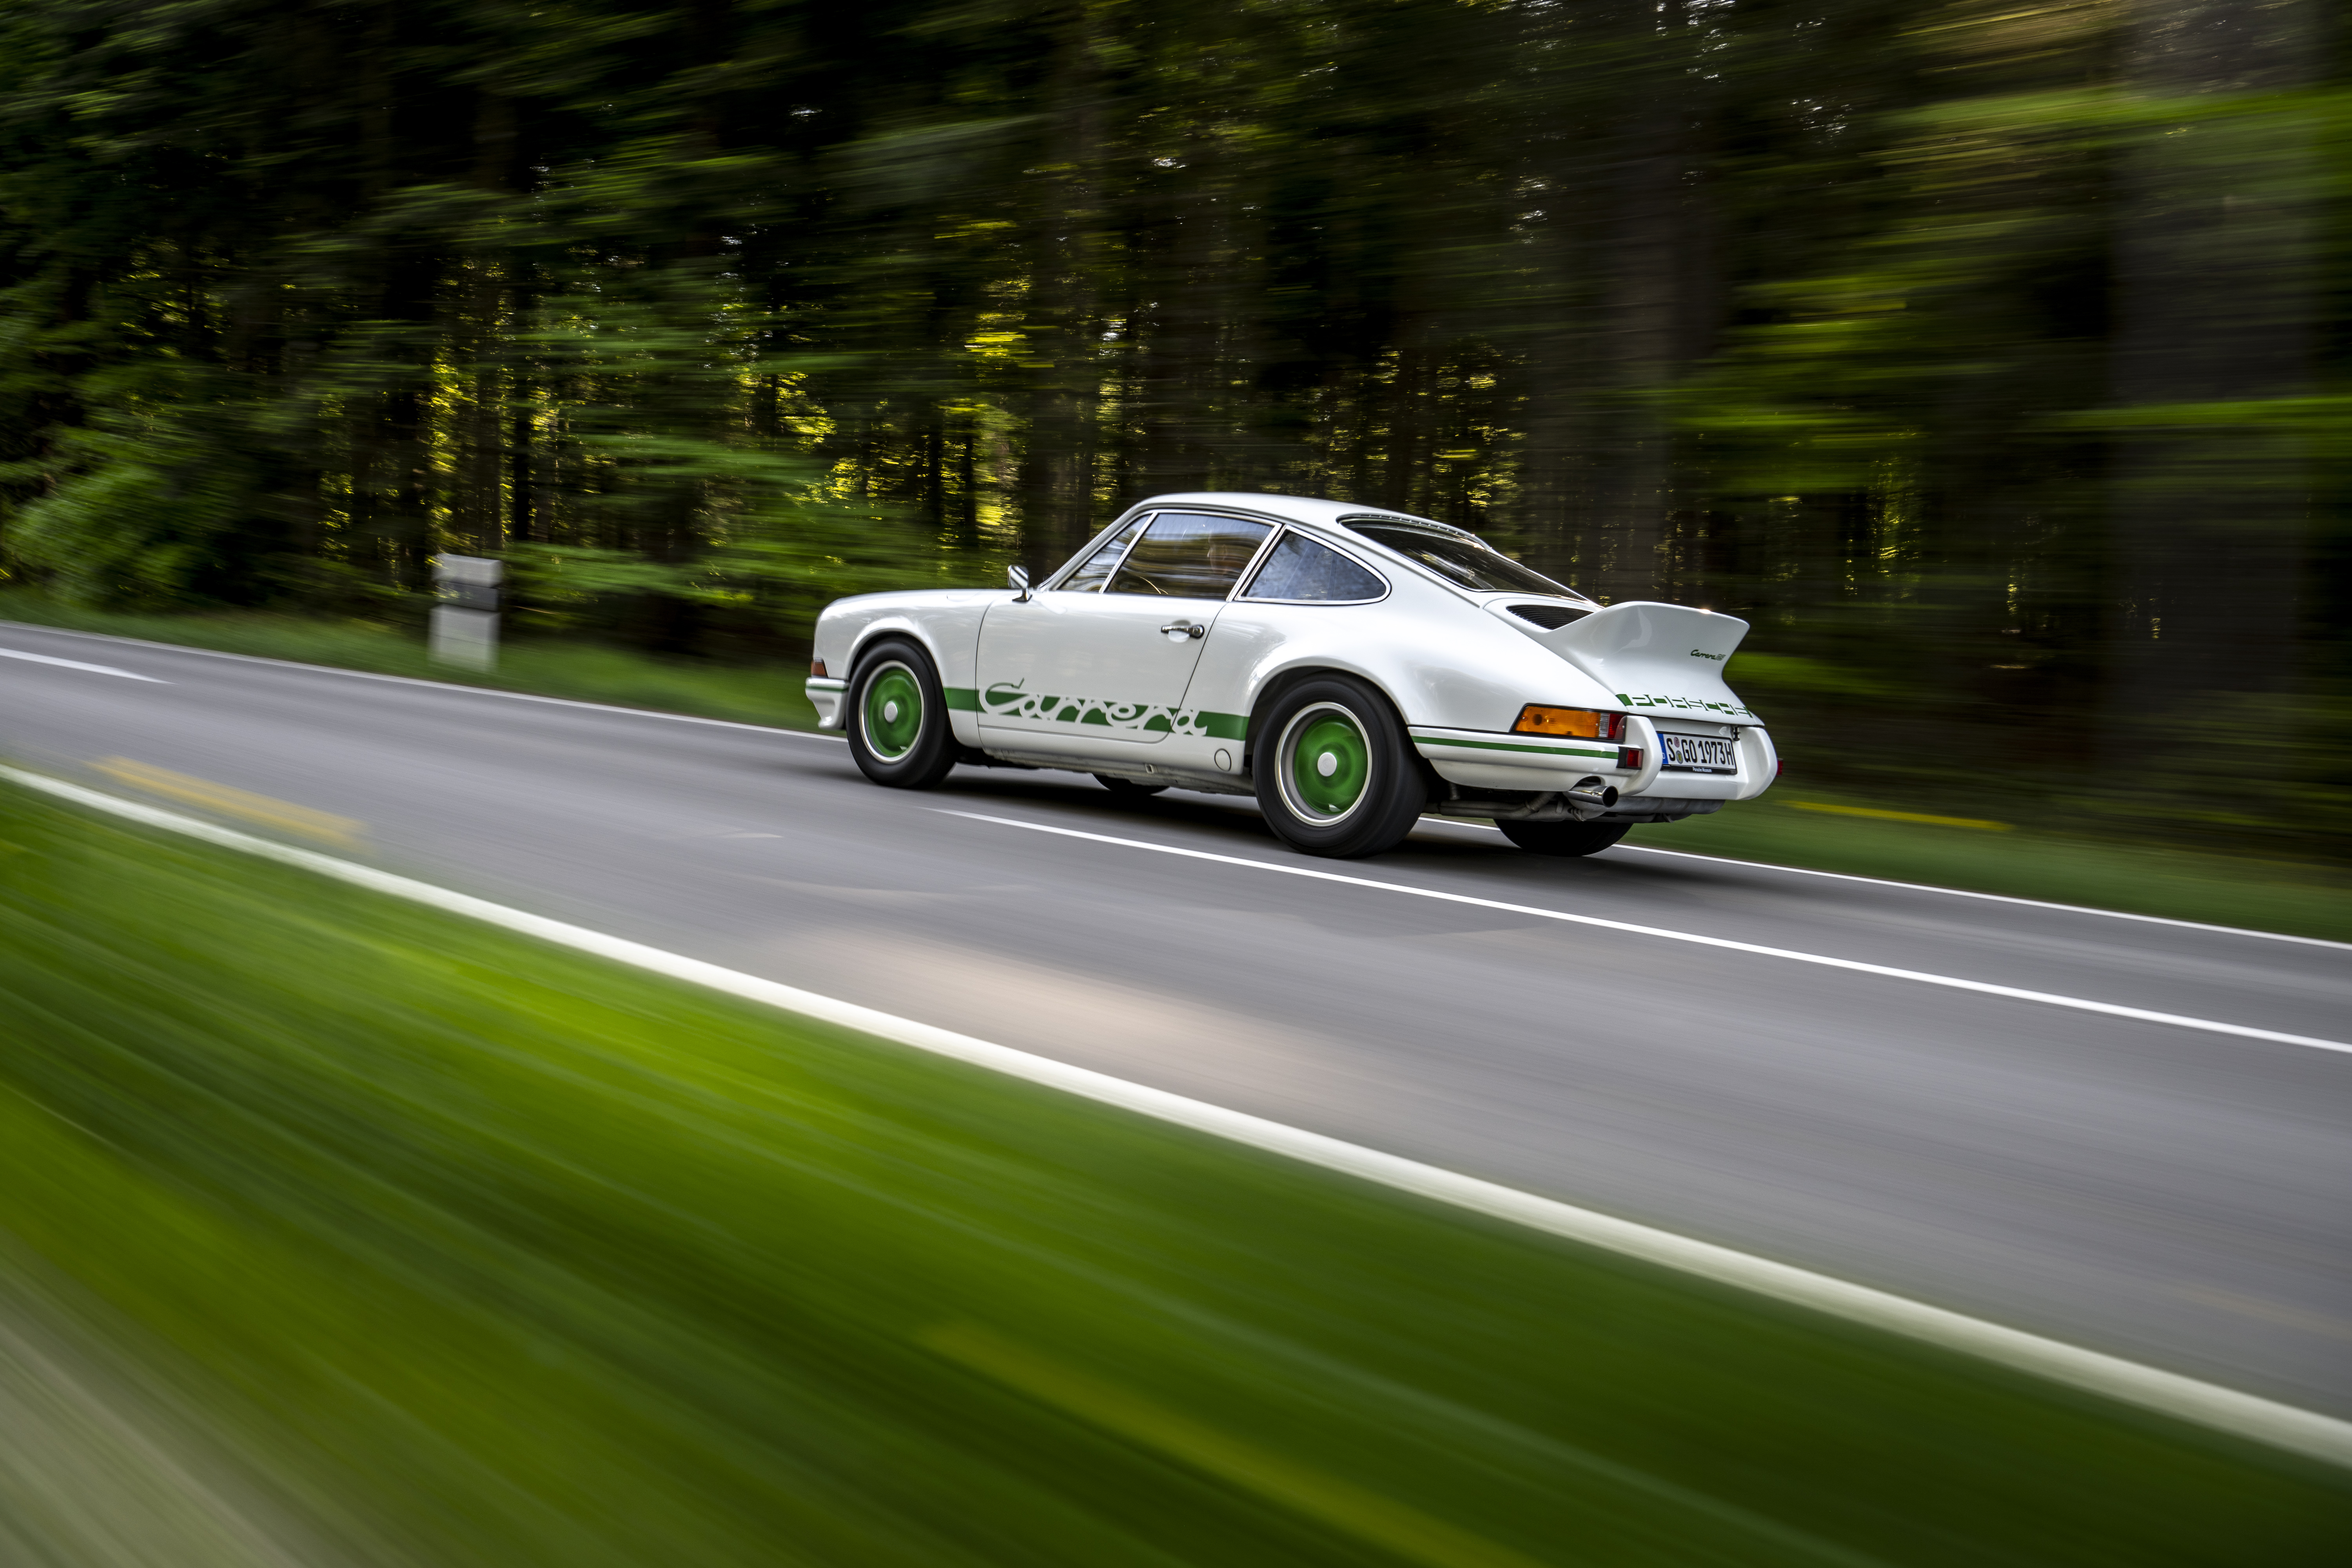 Porsche 911 Carrera RS 2.7 driving on a tree-lined road